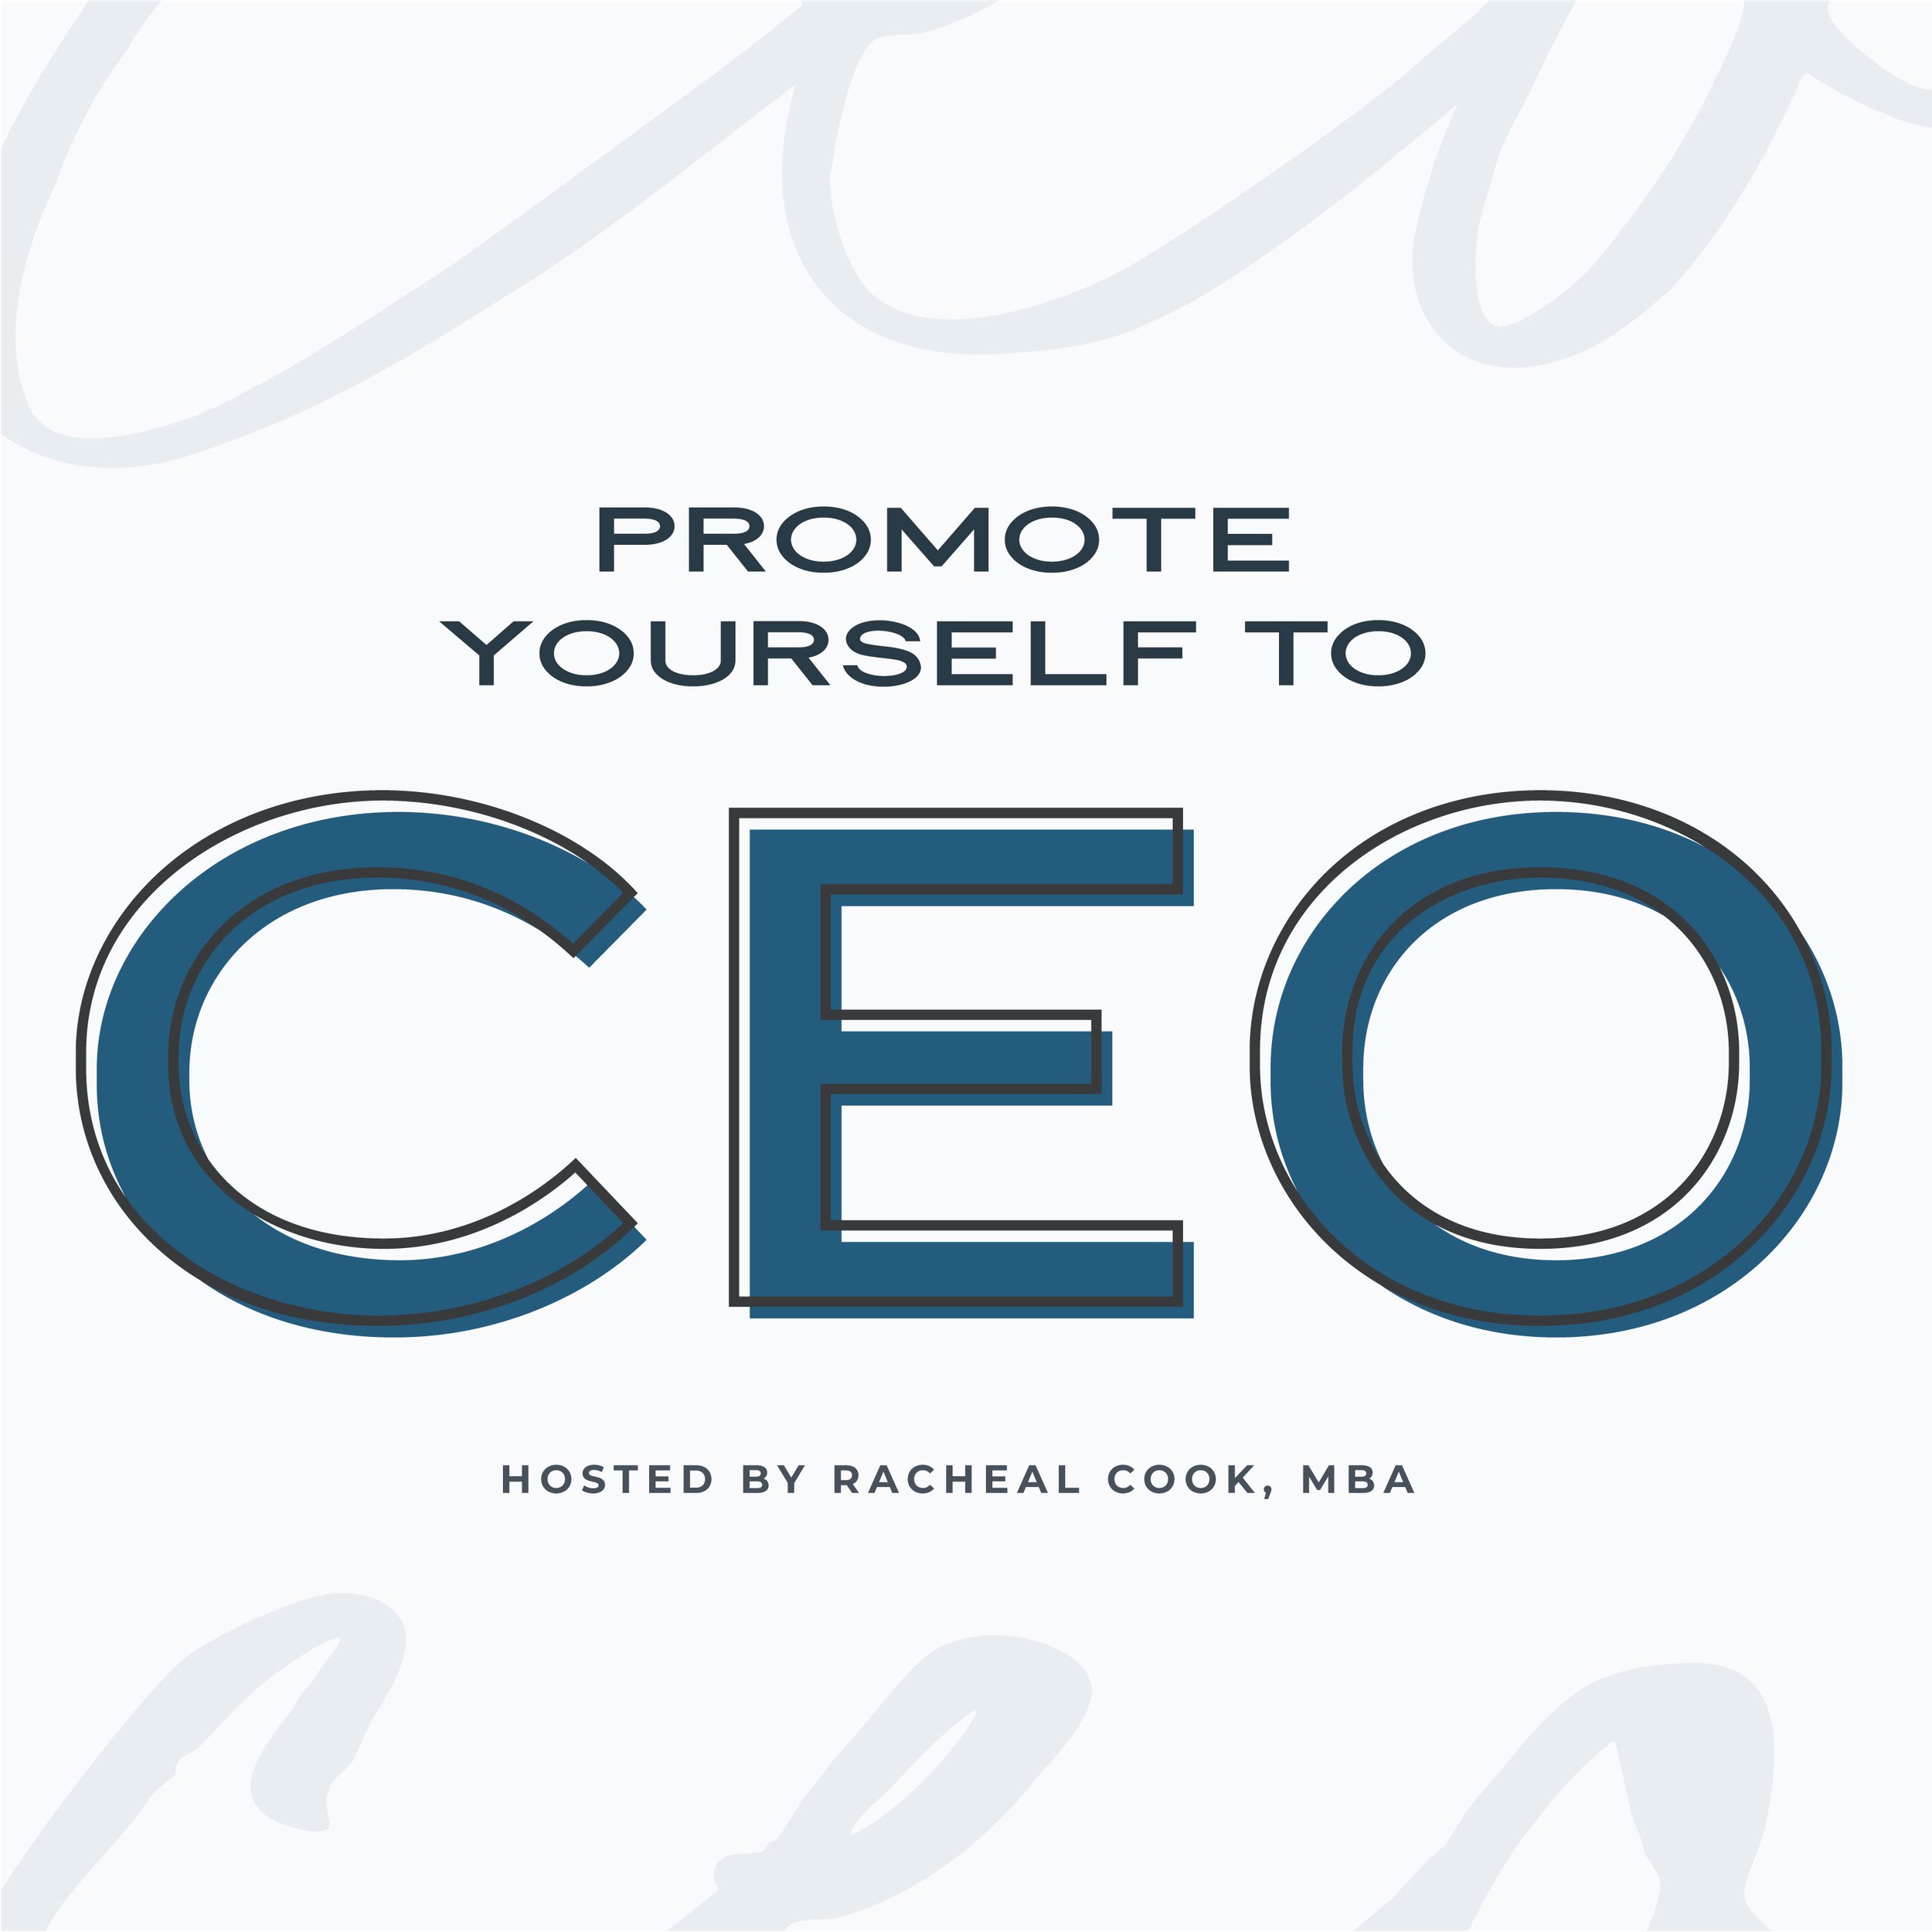 Promote-Yourself-To-CEO-Final-3000x3000.jpg